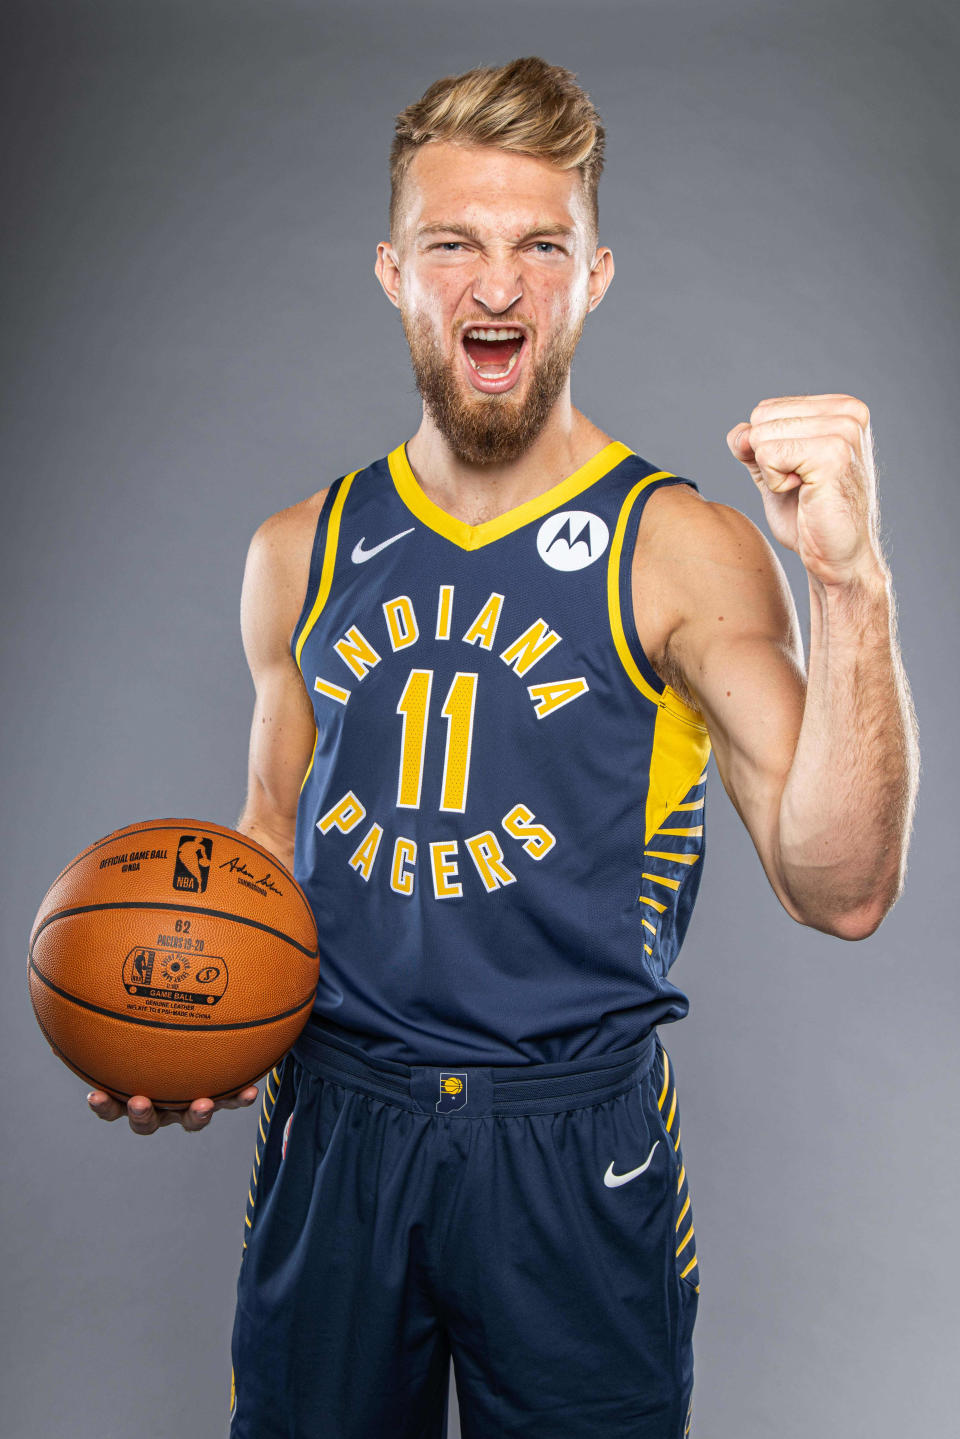 "There's Popeye's chicken sandwiches? Yes!" — Domantas Sabonis, we can only hope